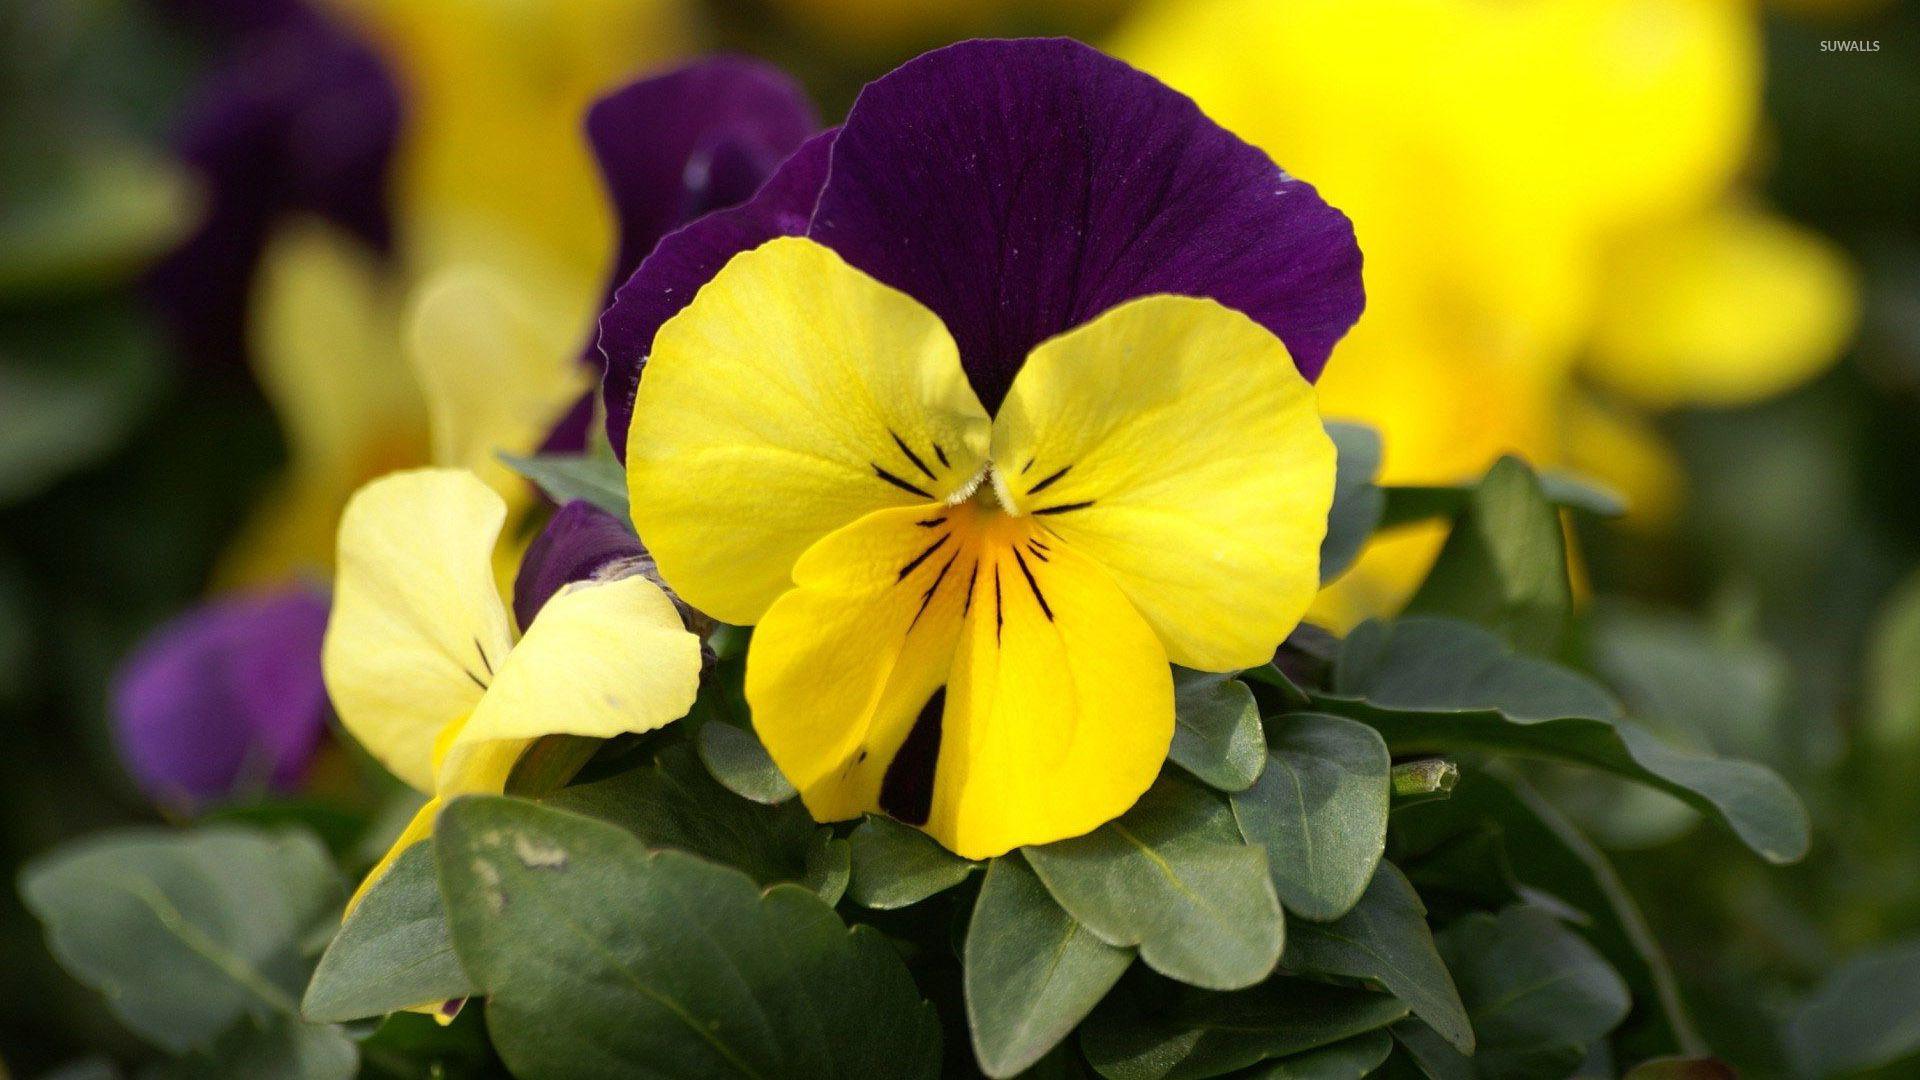 Pansy Flowers Wallpapers - Top Free Pansy Flowers Backgrounds ...